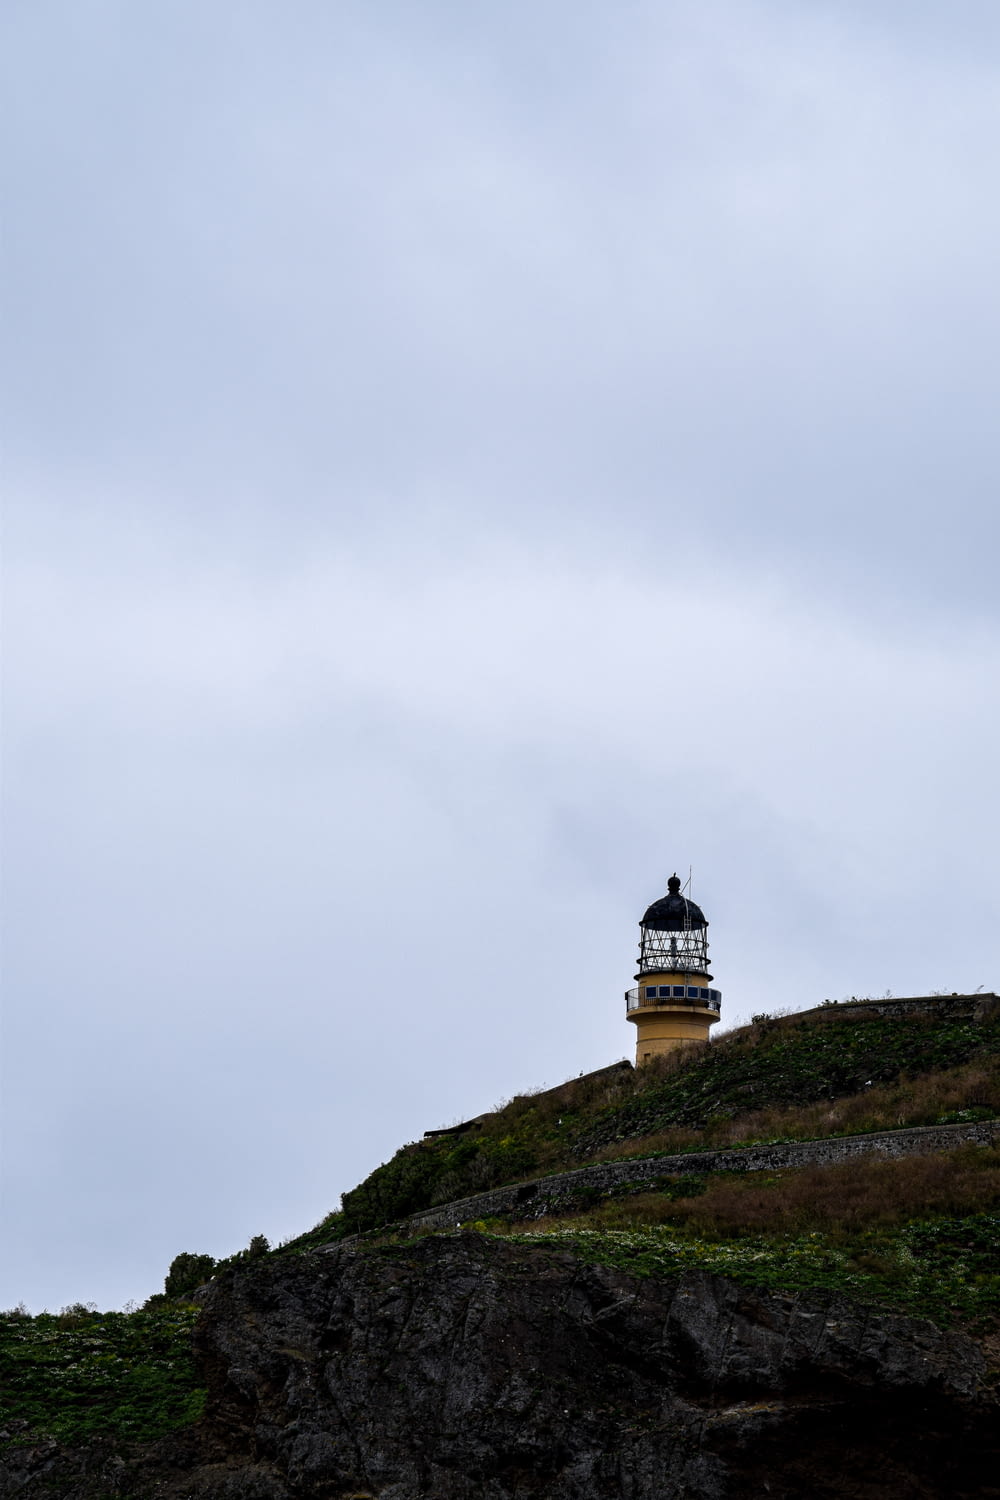 white and black lighthouse on green grass covered hill under white cloudy sky during daytime